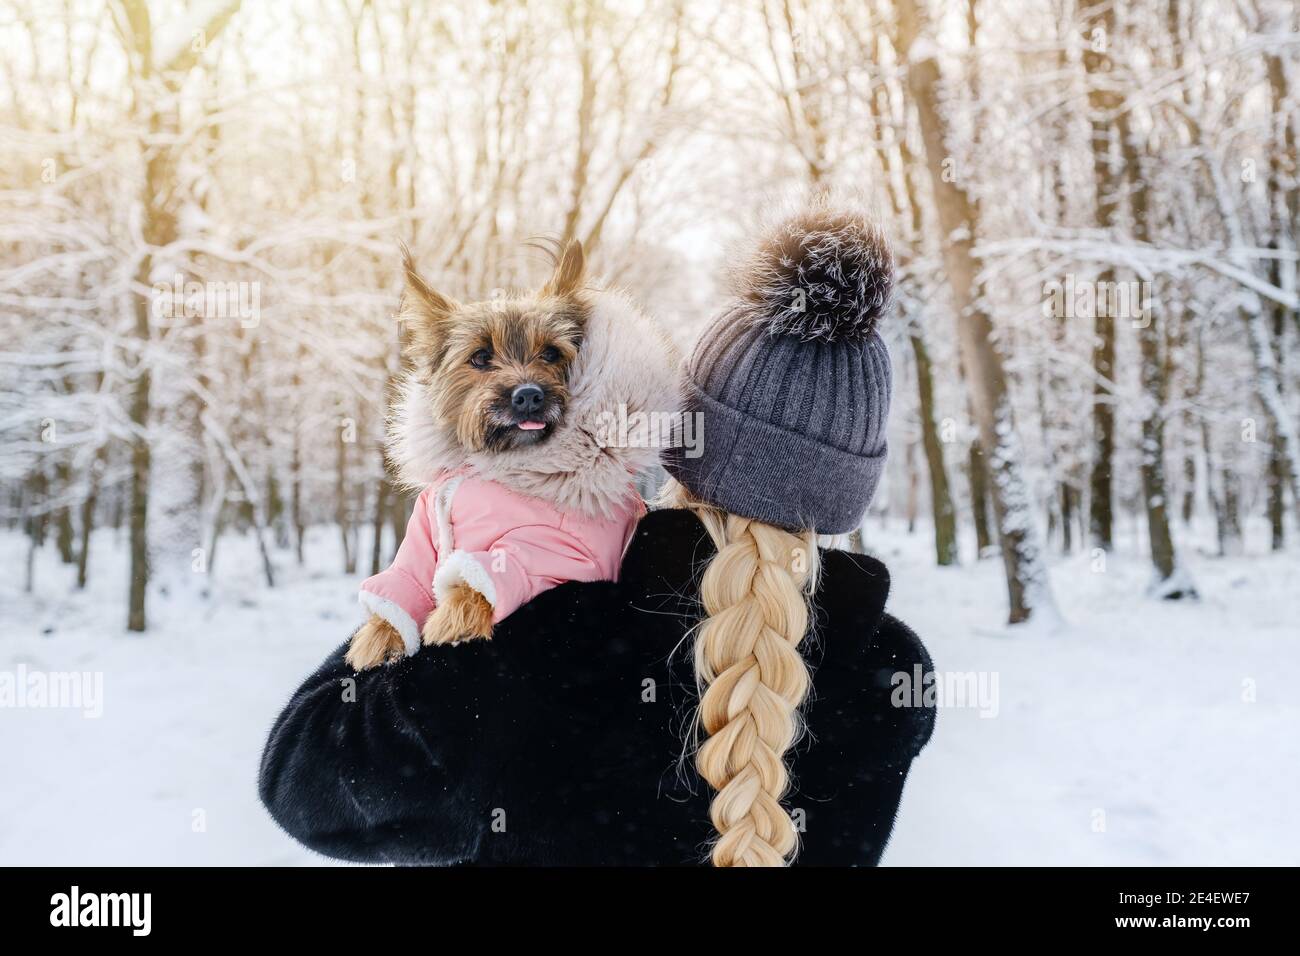 Unrecognizable woman with dog walking in winter park Stock Photo